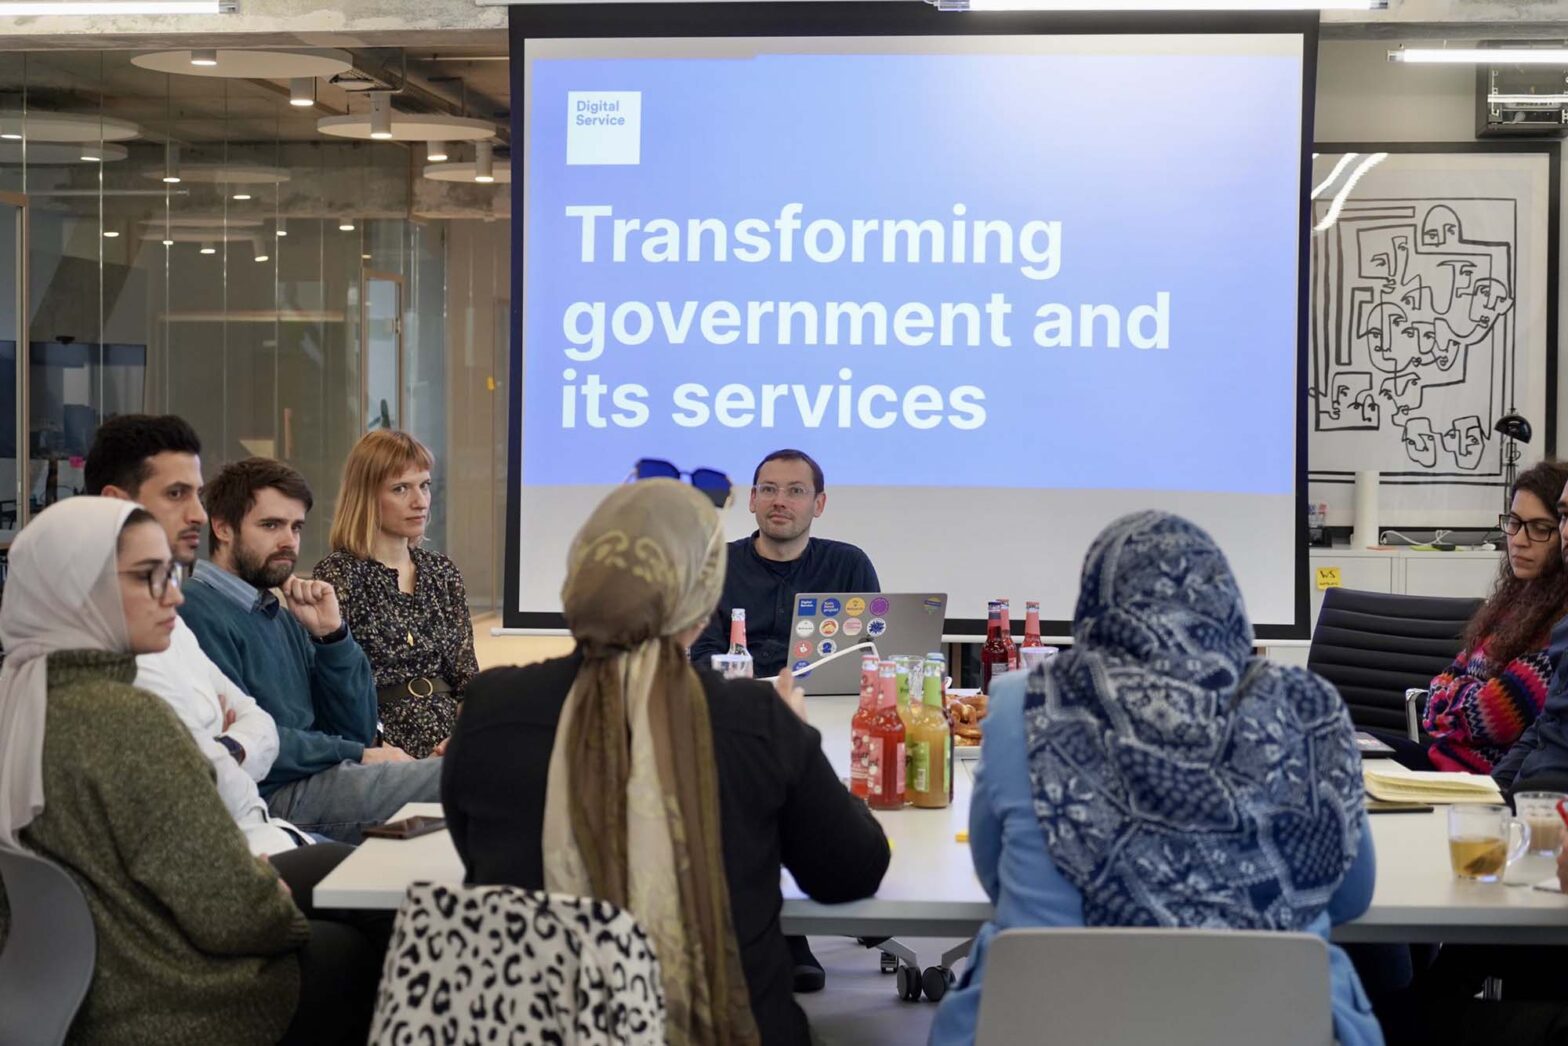 A group of people of different skin tones sitting around a larger table in a modern office space with glass and concrete, a projected slide behind them says: “Digital Service — Transforming government and its services”; some people wear office casual clothes, other contemporary Arabic clothes with headscarves